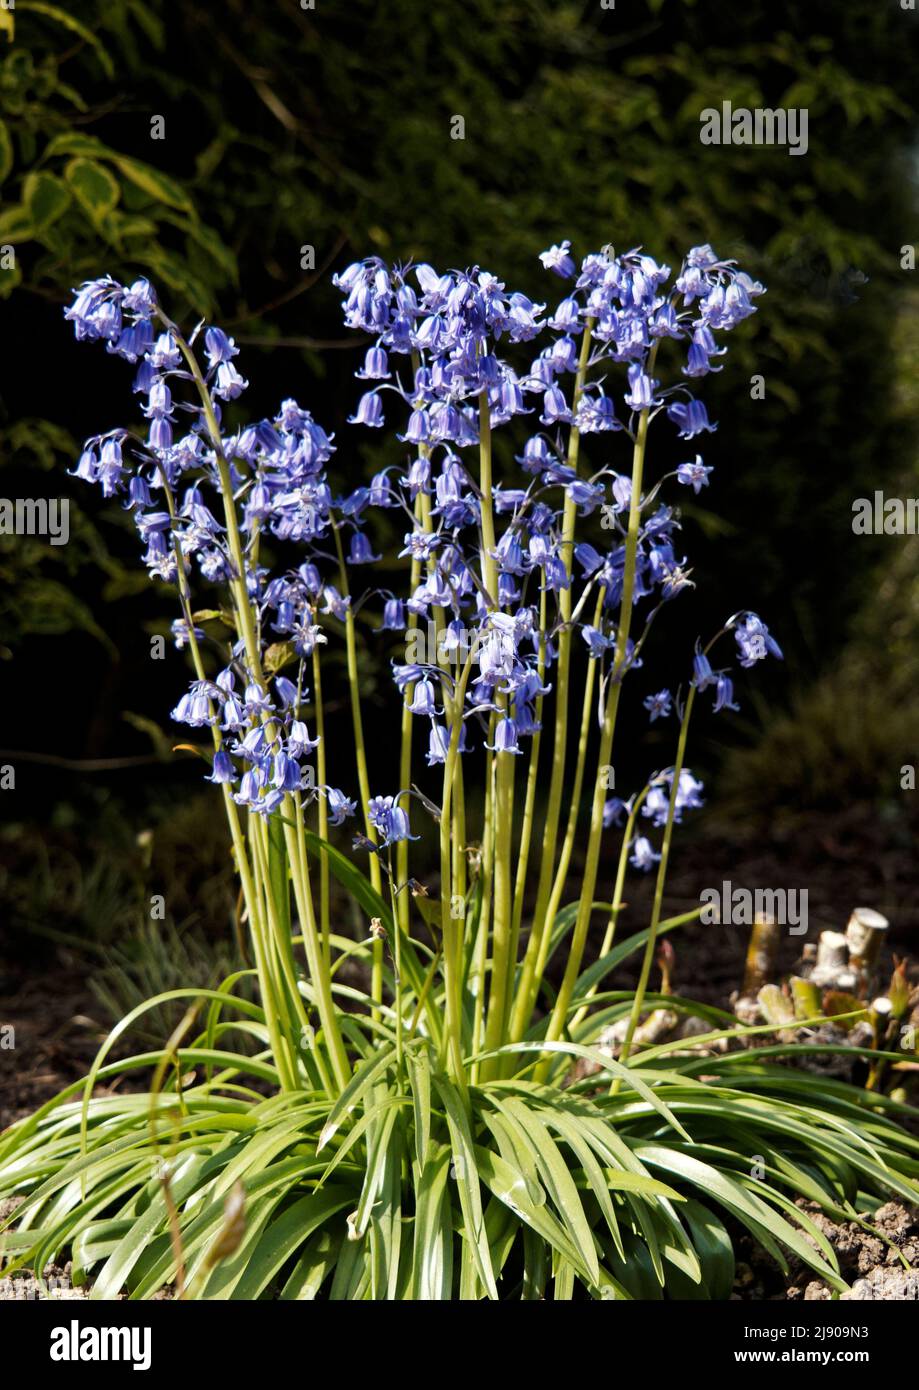 Bluebells are bell-shaped perennial herbs. spend the majority of their time underground as bulbs, emerging, often in droves in April and May. Stock Photo